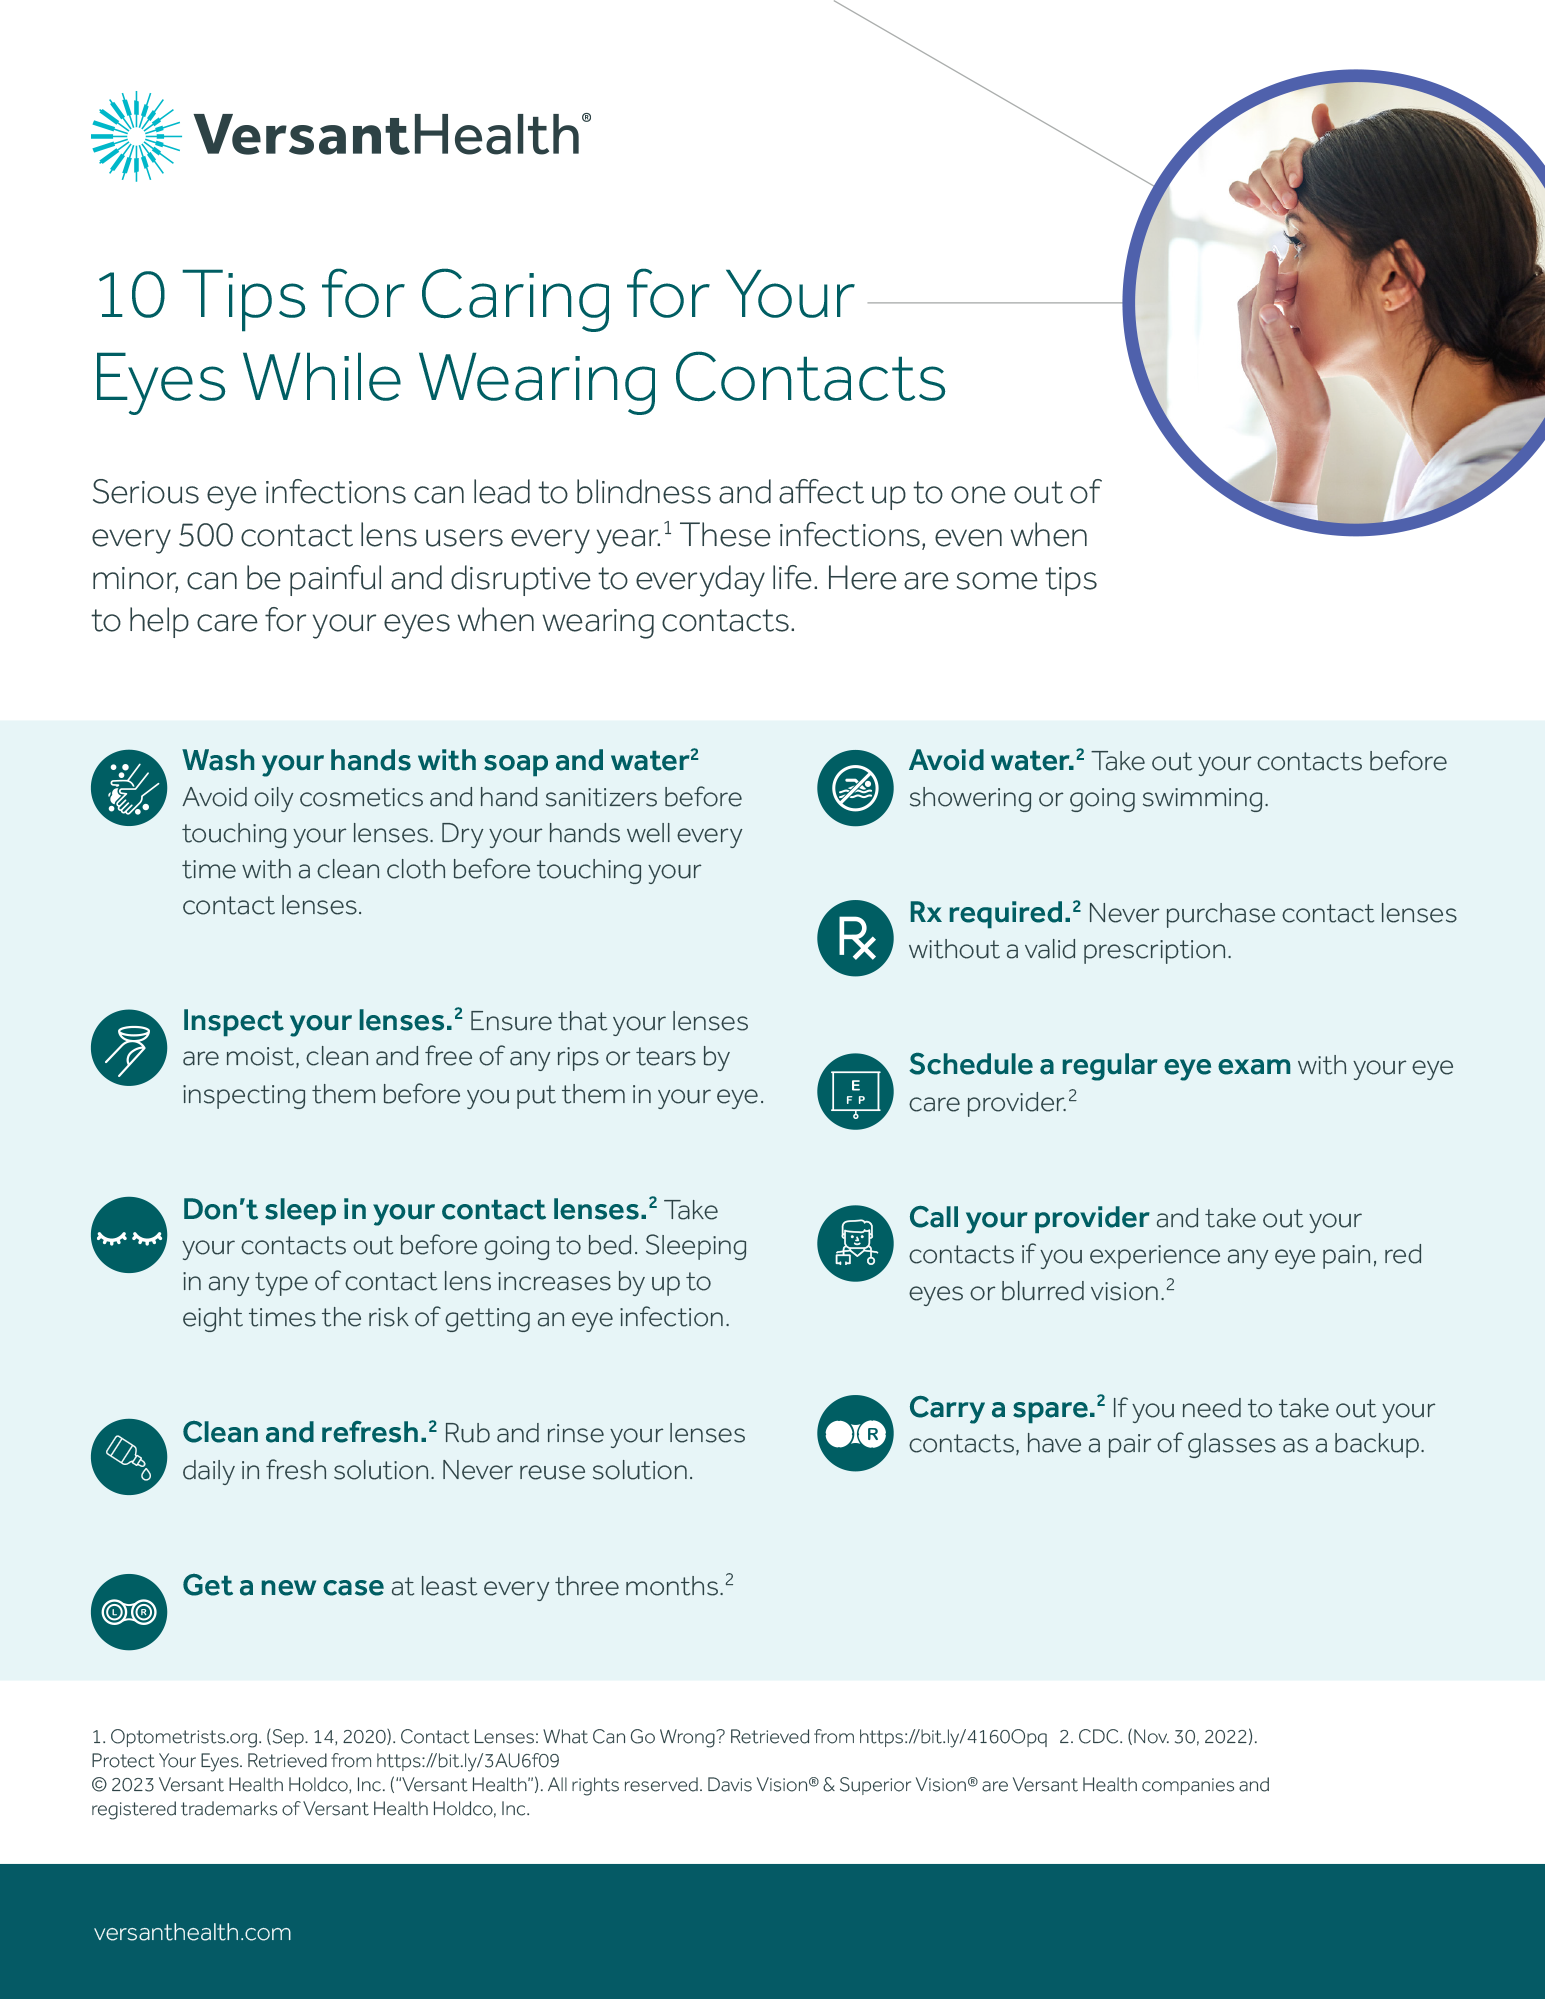 An infographic that talks about 10 tips that contact lens wearers can use to help their everyday lives